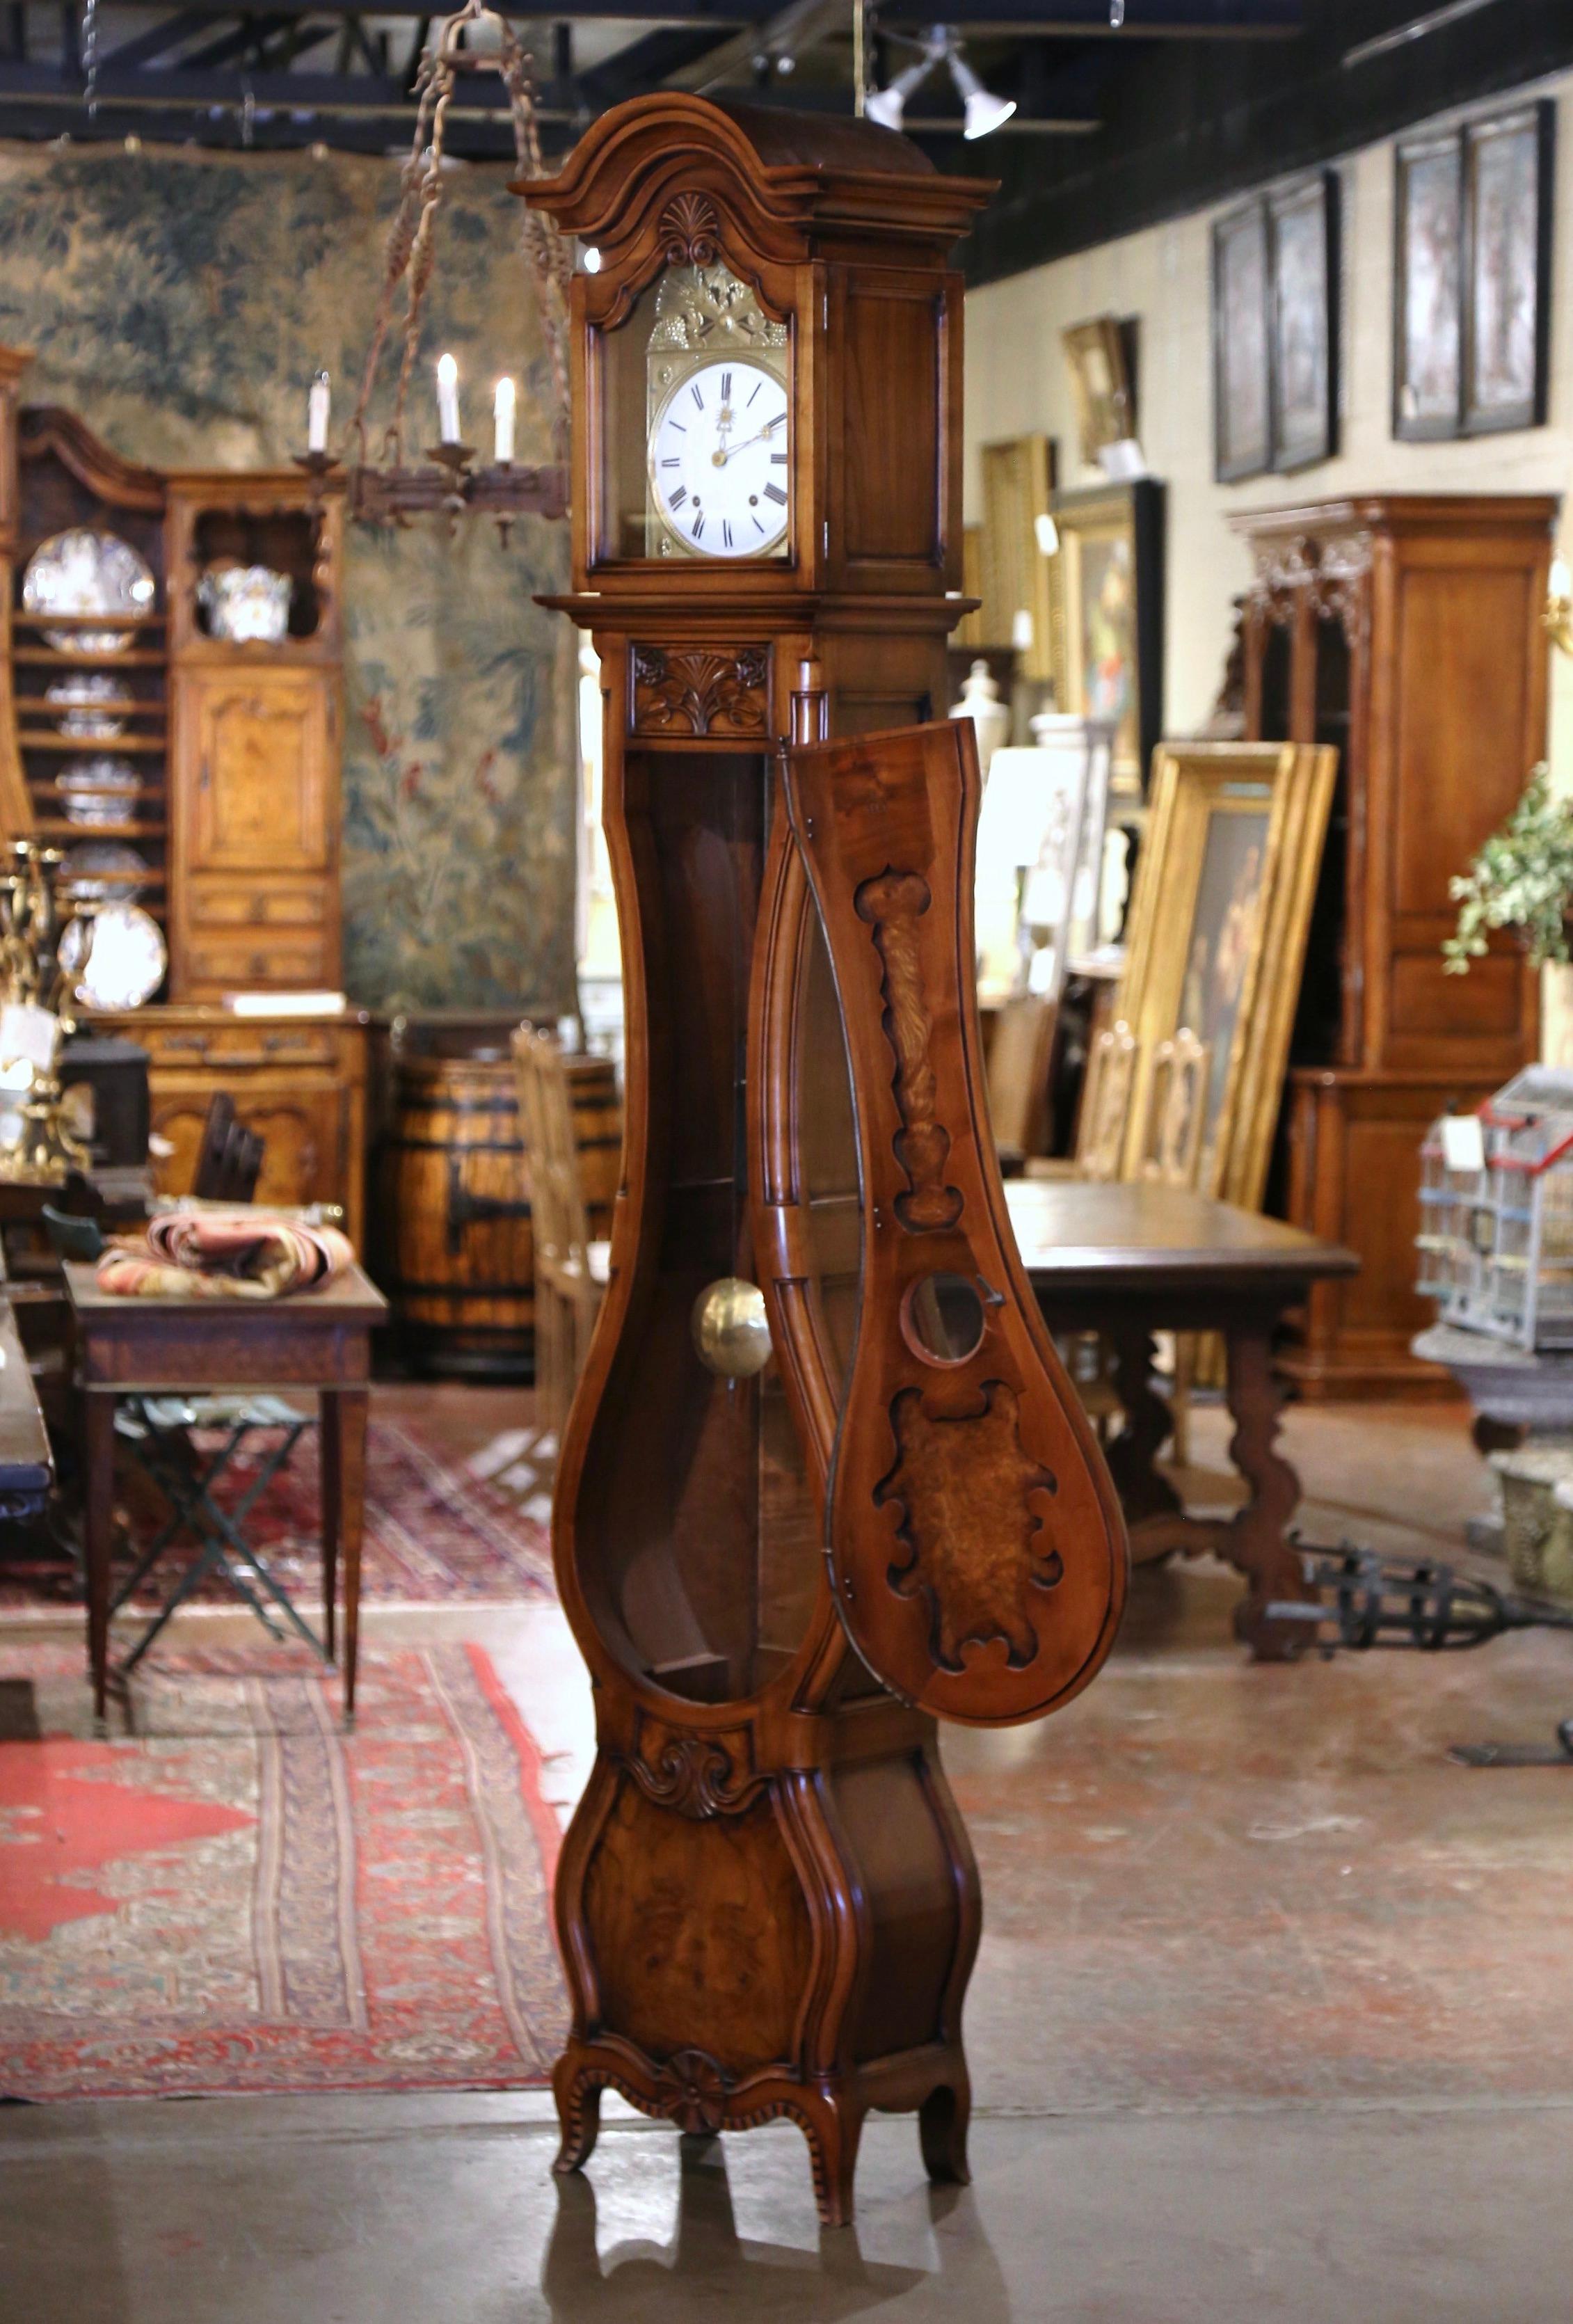 20th Century French Louis XV Carved Burl Wood Grandfather Clock from Lyon Region For Sale 3